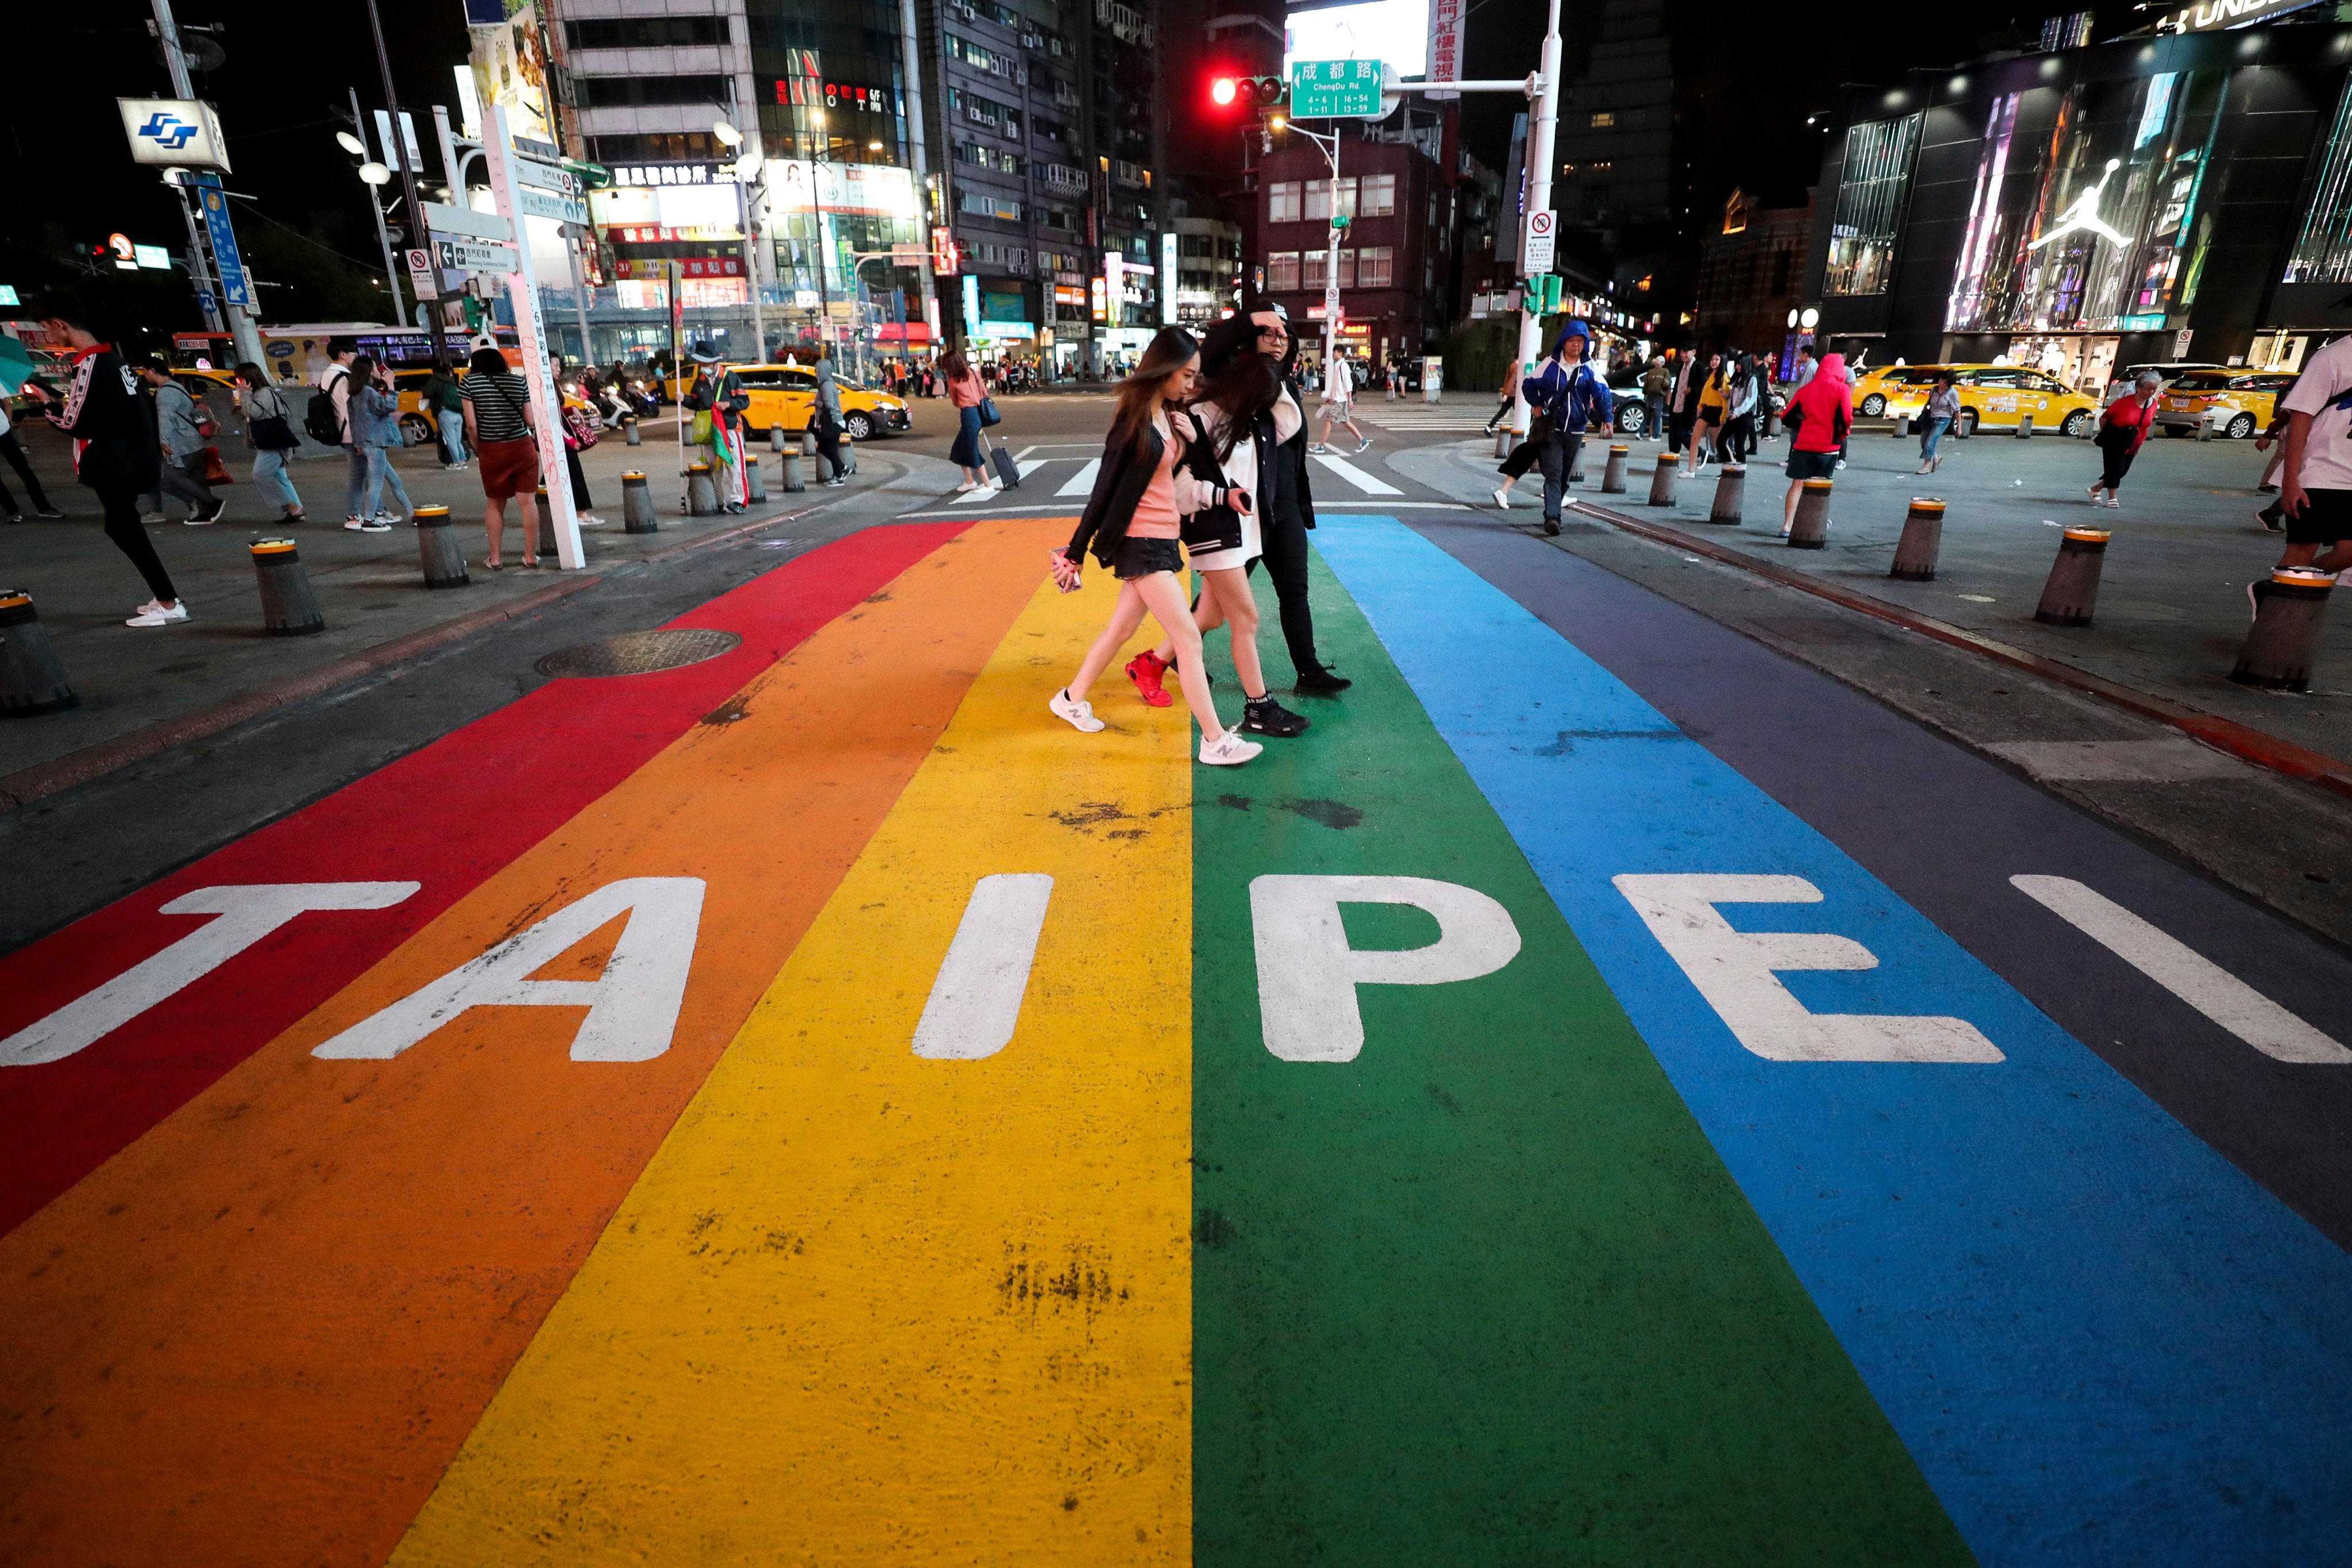 People walk across a pedestrian lane painted in the colours of the rainbow flag in Taipei on October 14, 2019. The government has earned praise for liberal policies like gay marriage, but seems much less enthusiastic about tackling serious issues such as crime. Photo: EPA-EFE